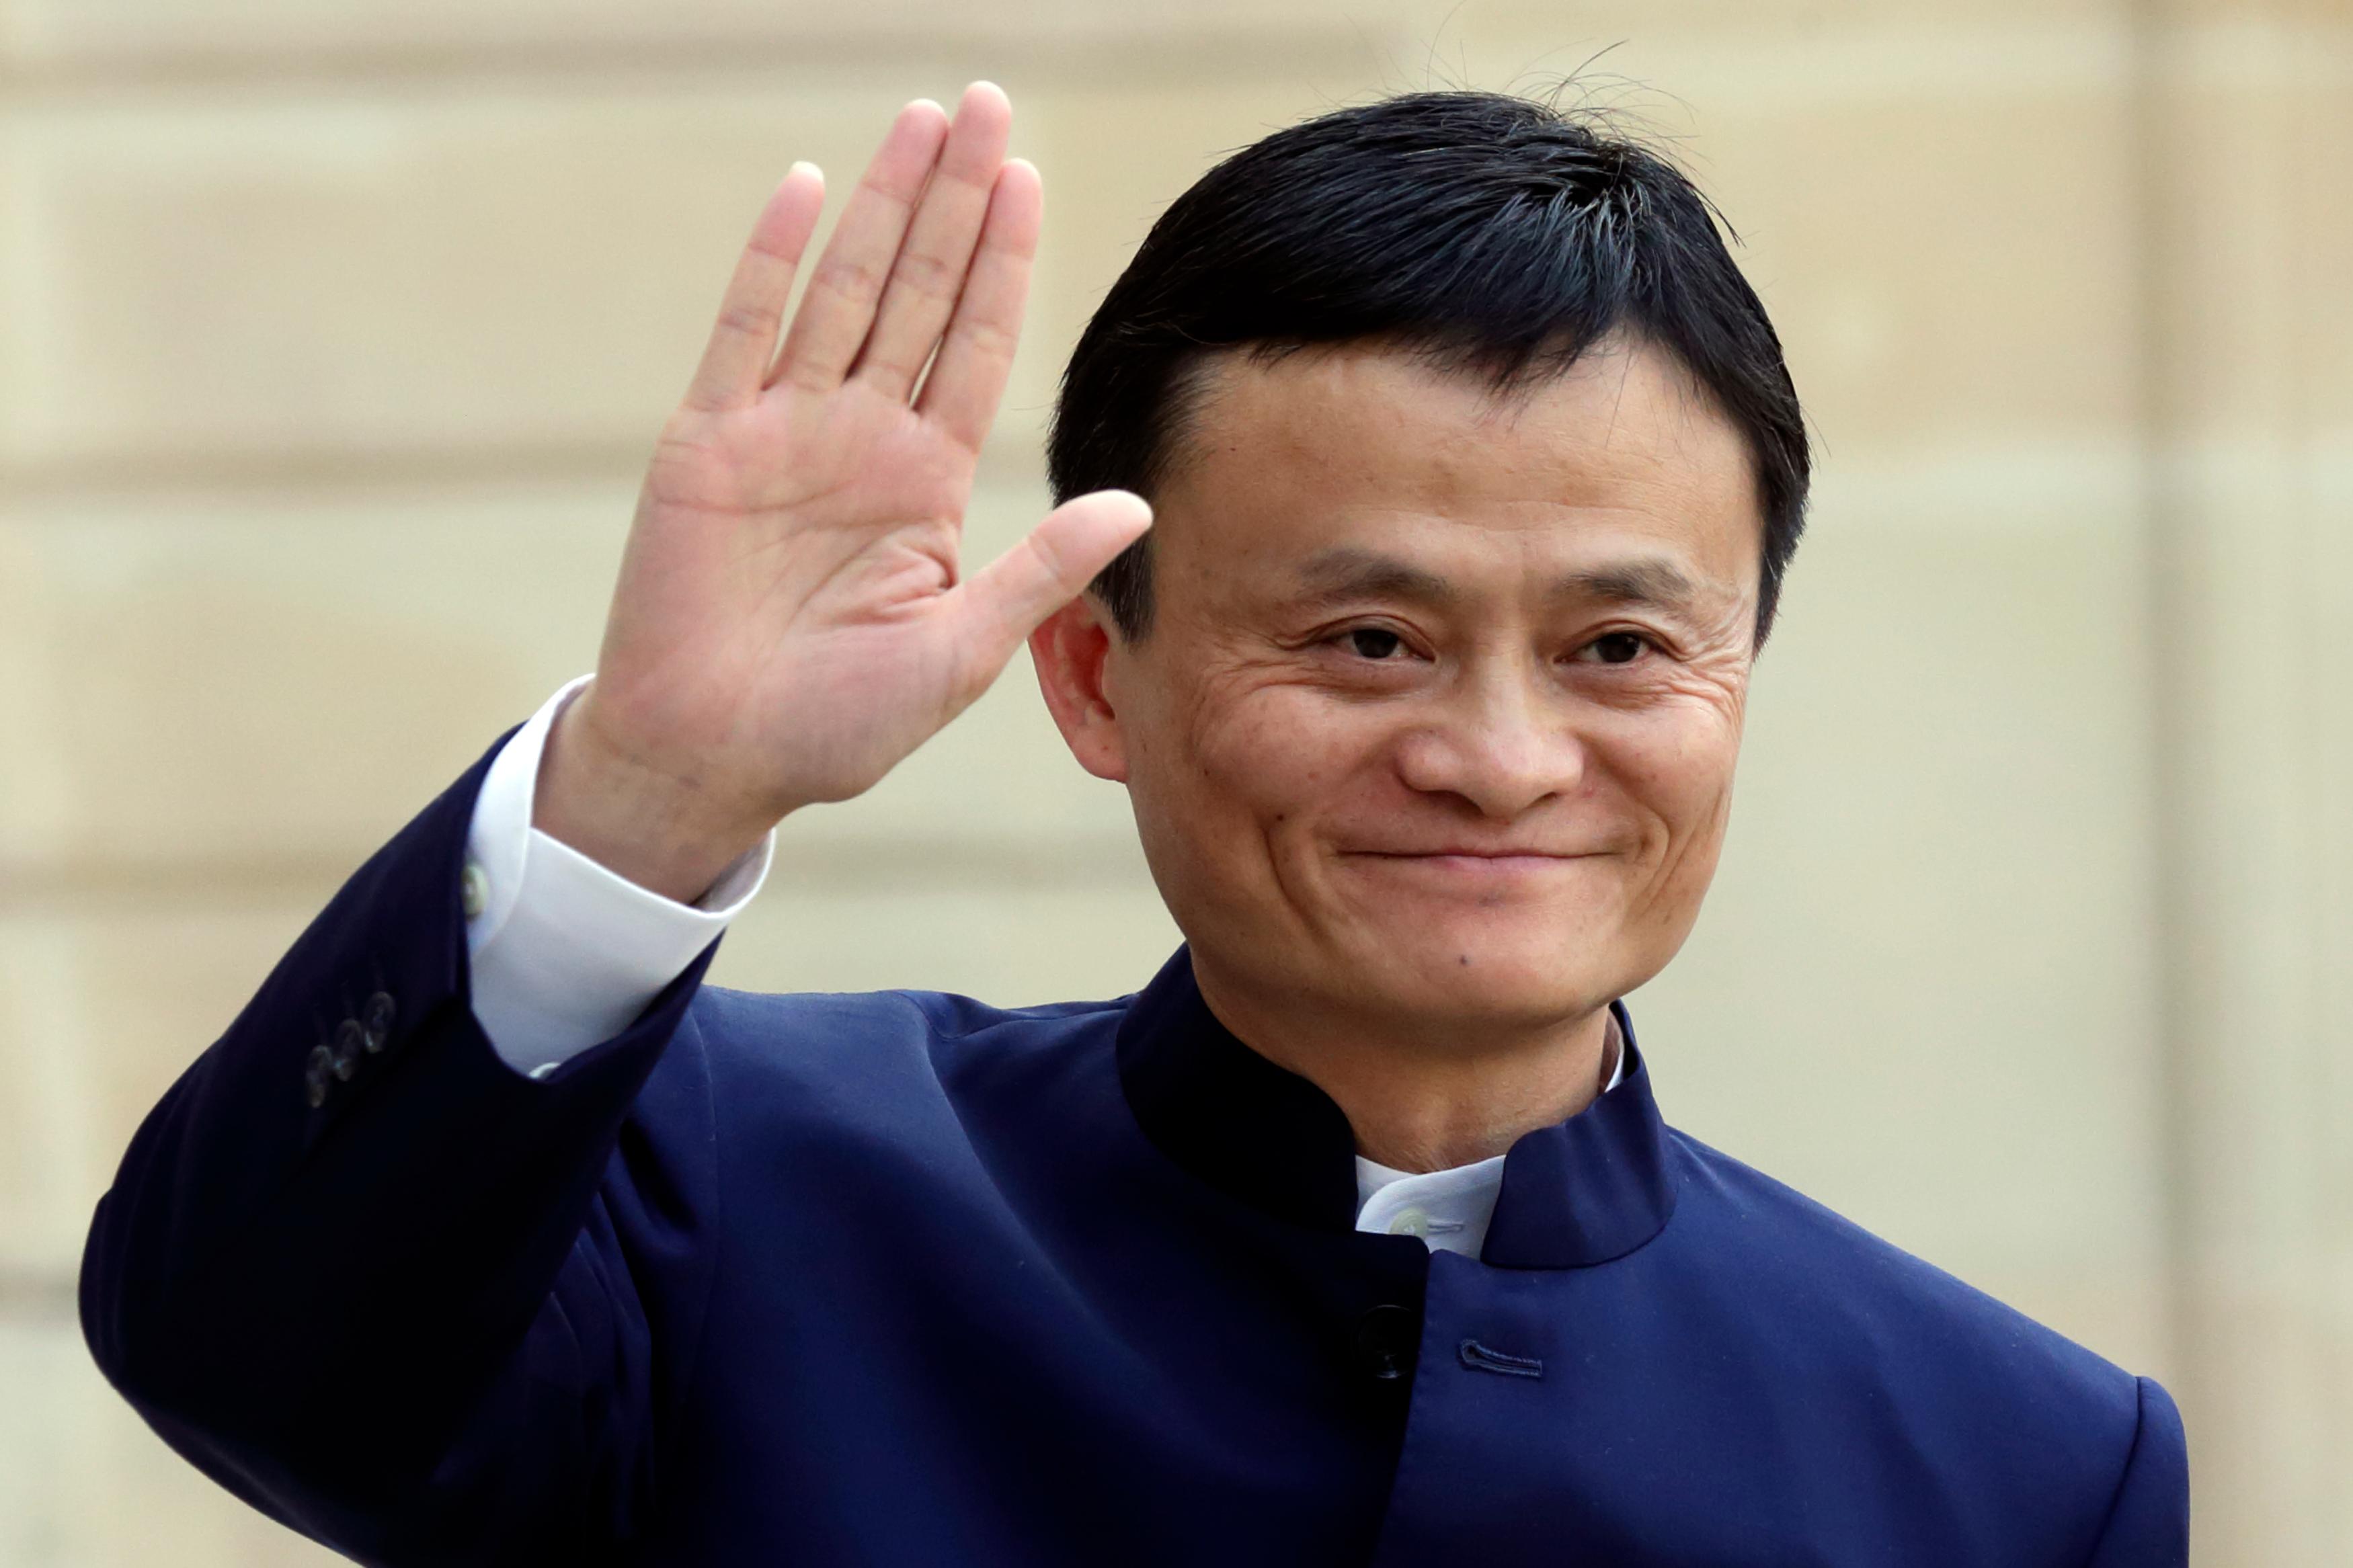 Jack Ma in India; Alibaba to help small local businesses